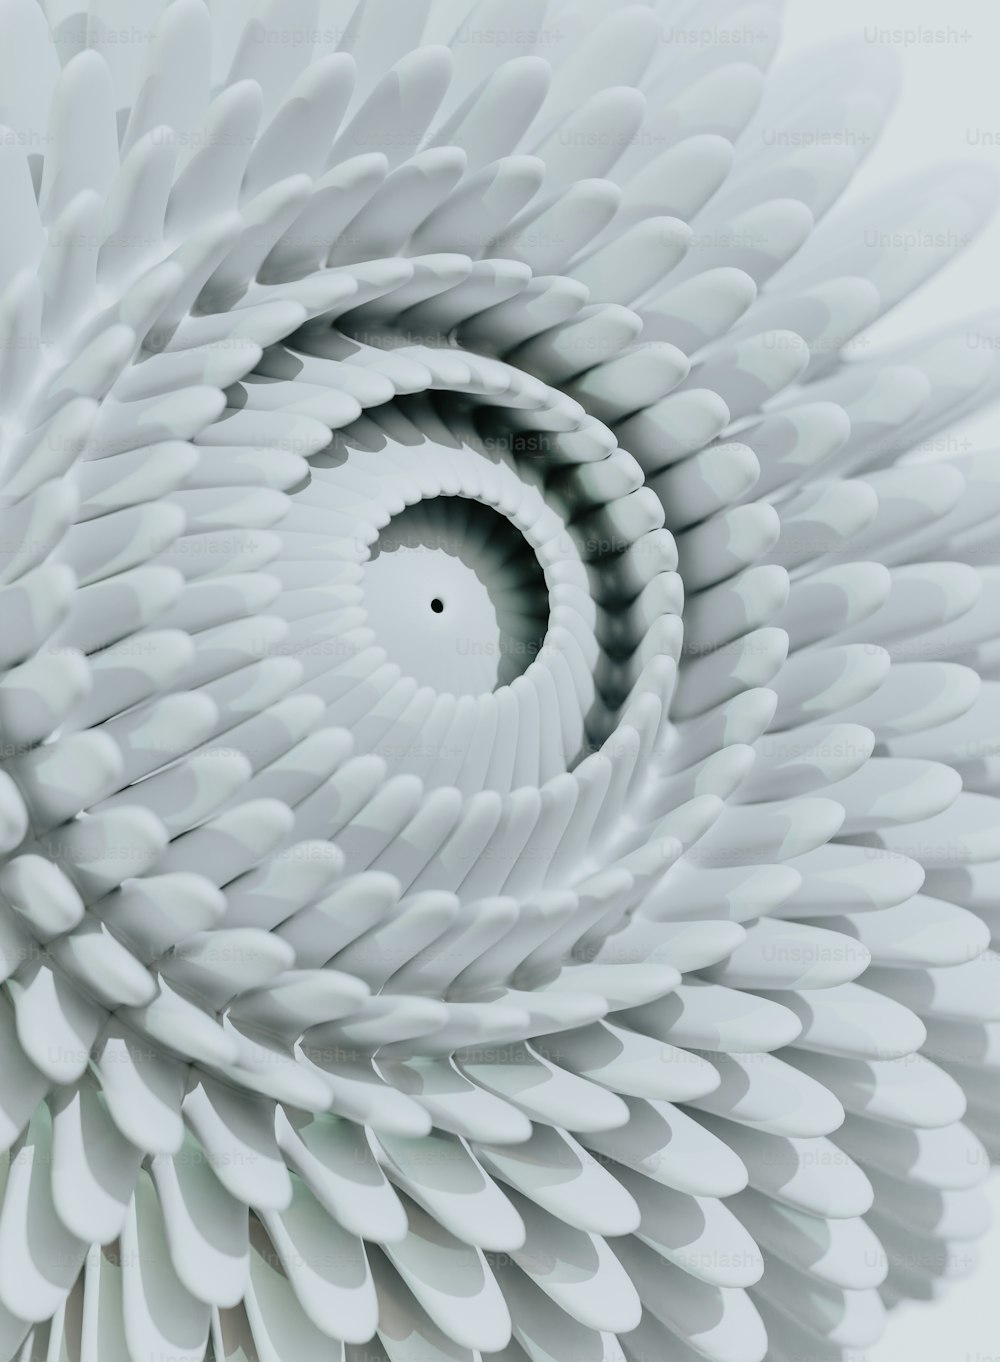 a close up of a white flower with a spiral design